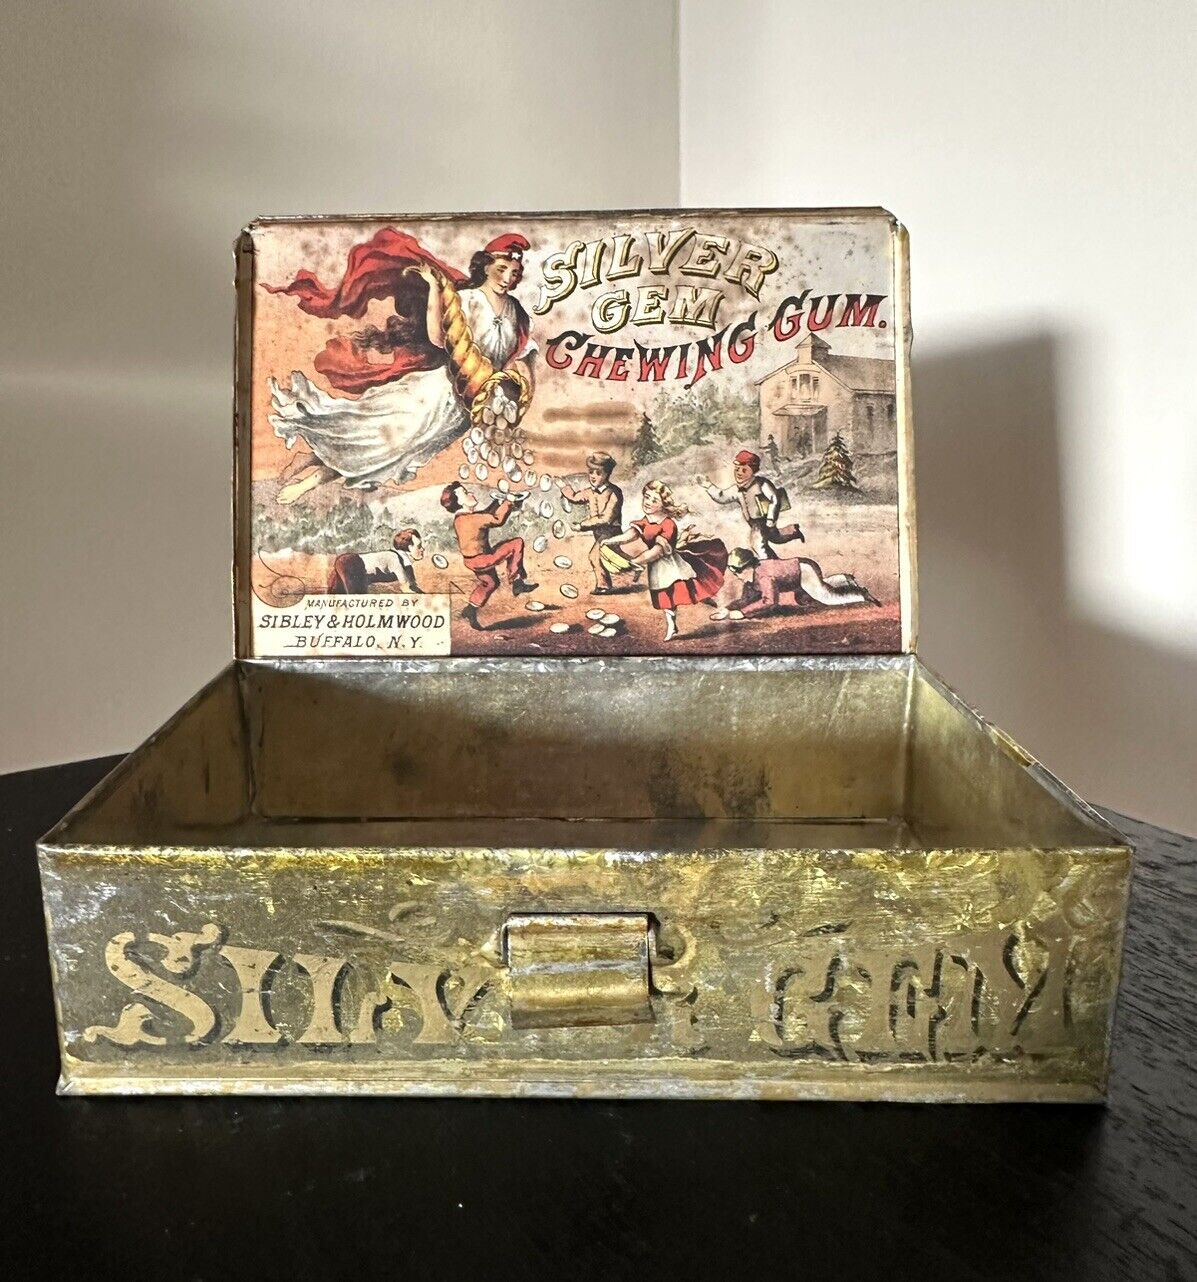 Antique 1890s Silver Gem Chewing Gum advertising store display tin box